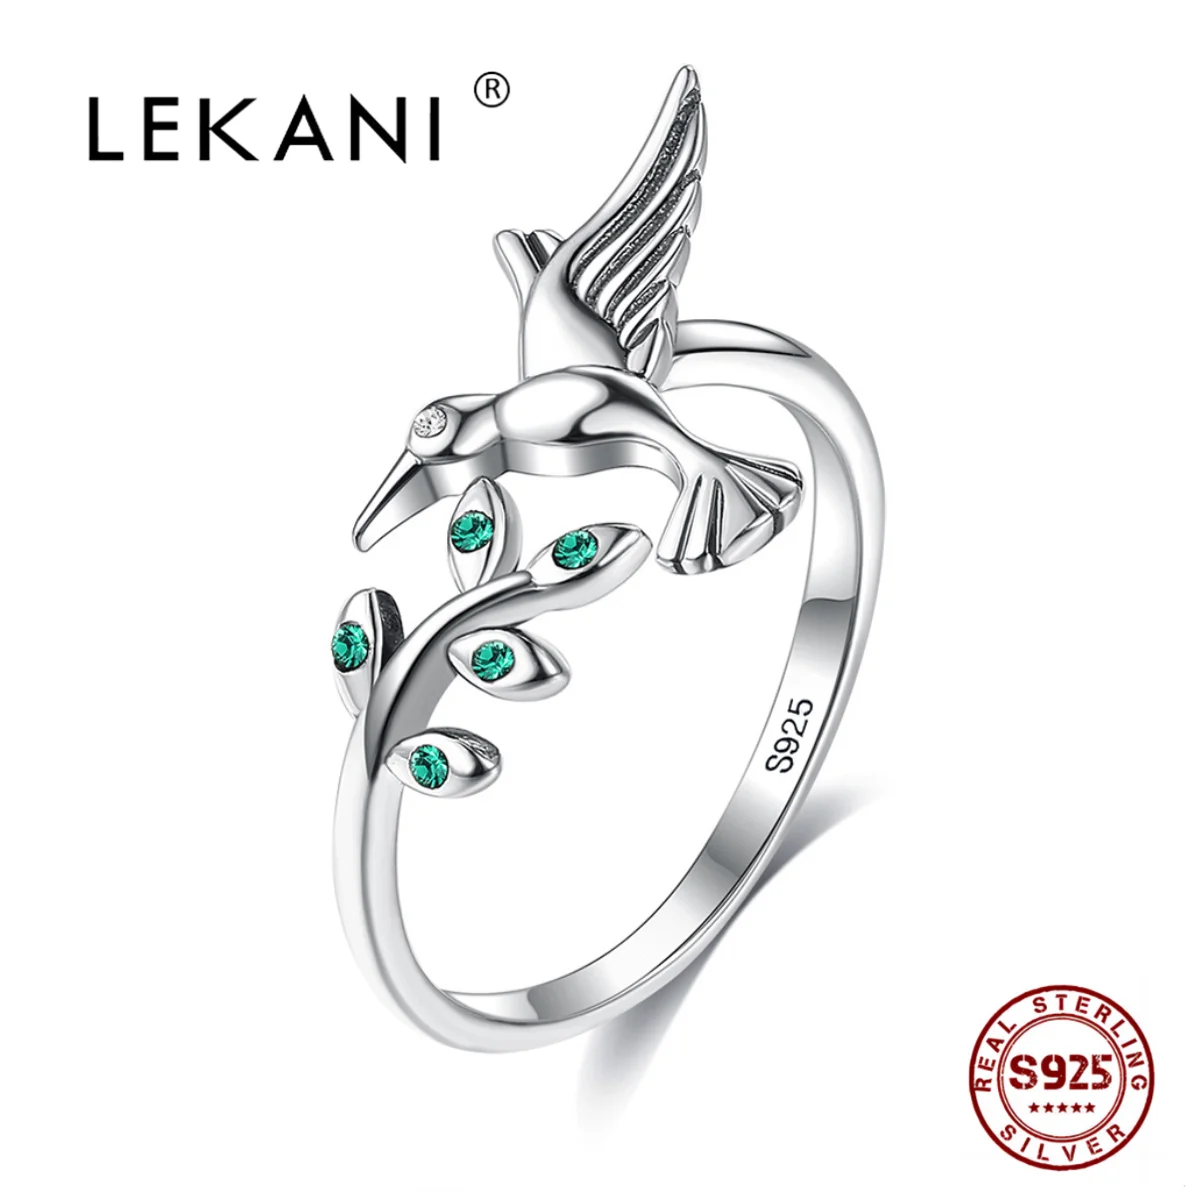 

LEKANI Real 925 Sterling Silver Cubic Zirconia Bird and Leaves Adjustable Open Vintage Round Ring Gifts Fine Jewelry For Women